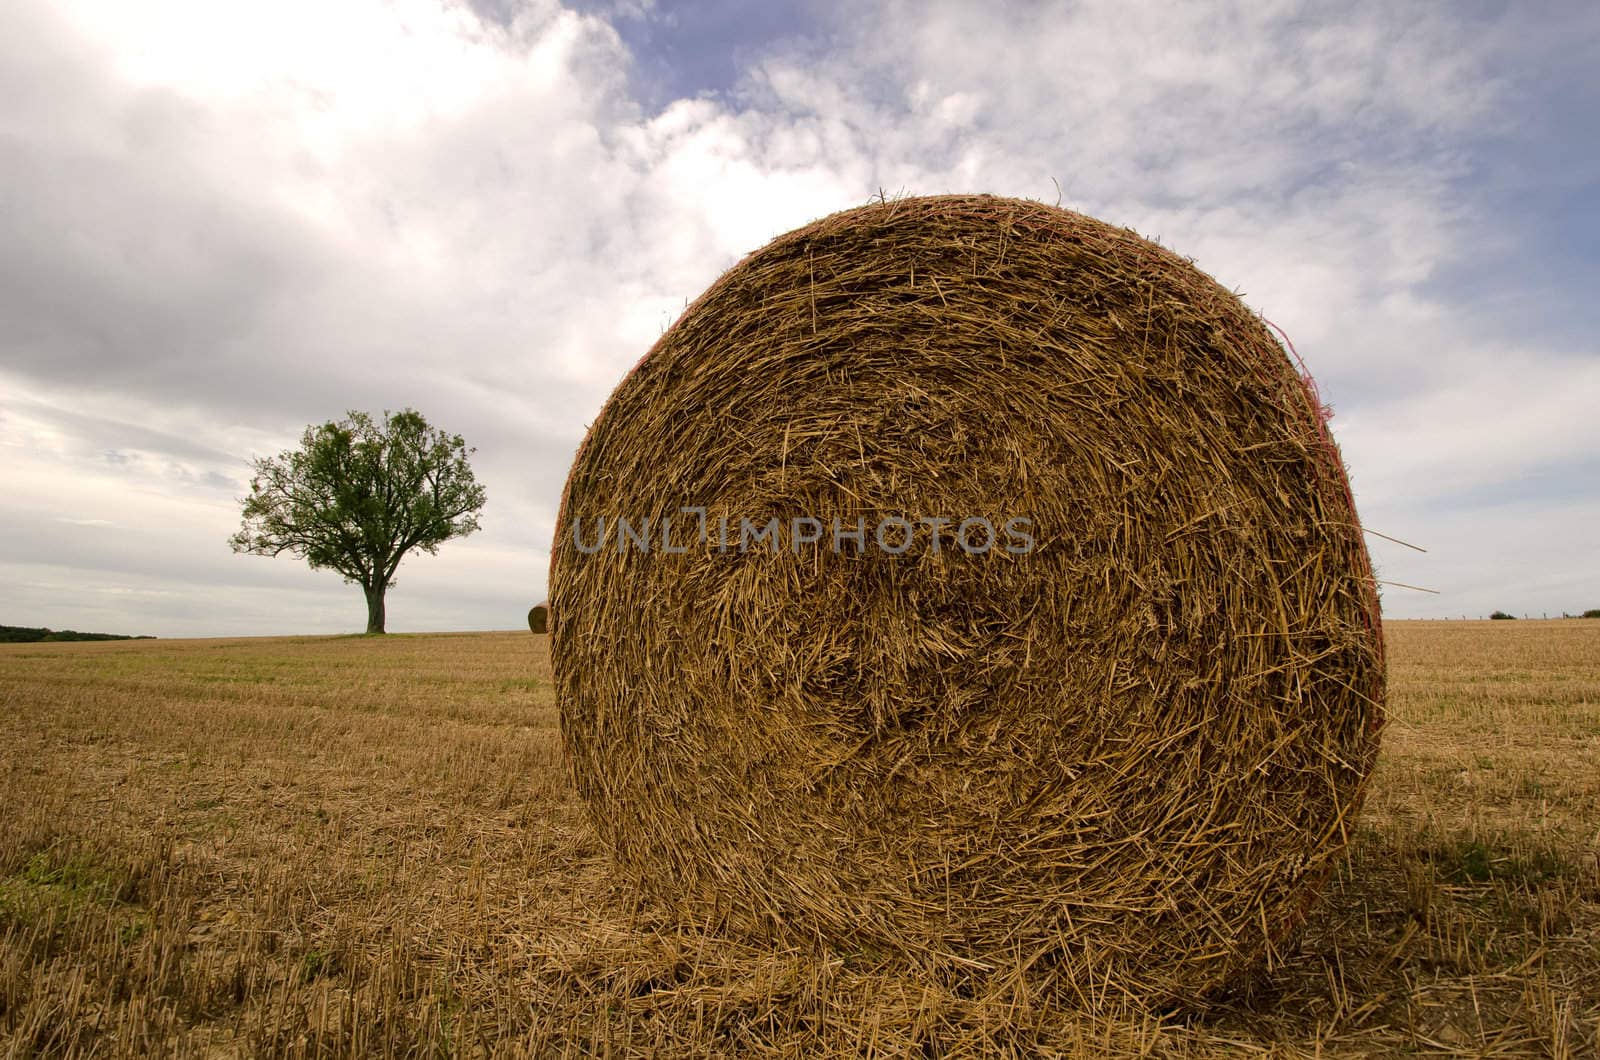 the straw ball on the field